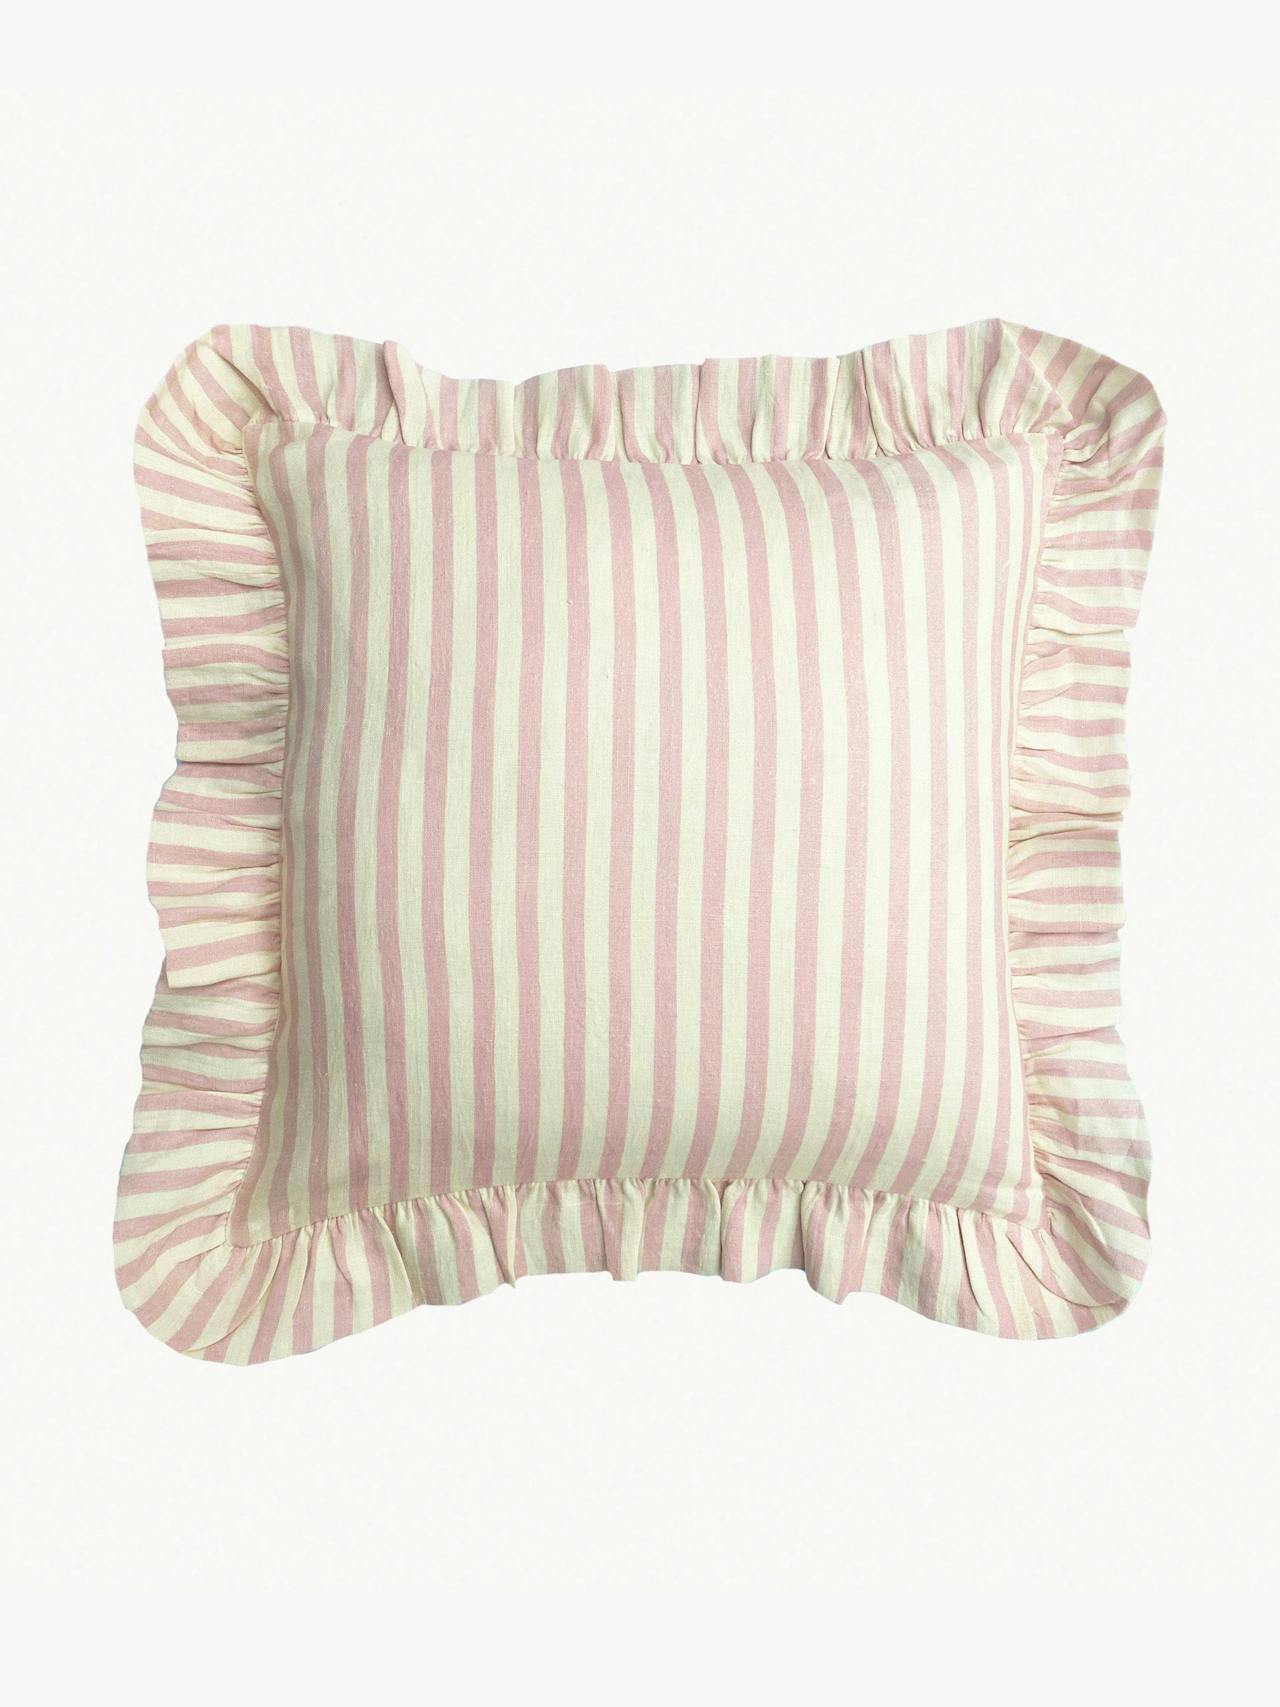 A 100% linen Amuse La Bouche cushion cover handmade in India by skilled artisans using eco-friendly pigmented dyes. Collagerie.com